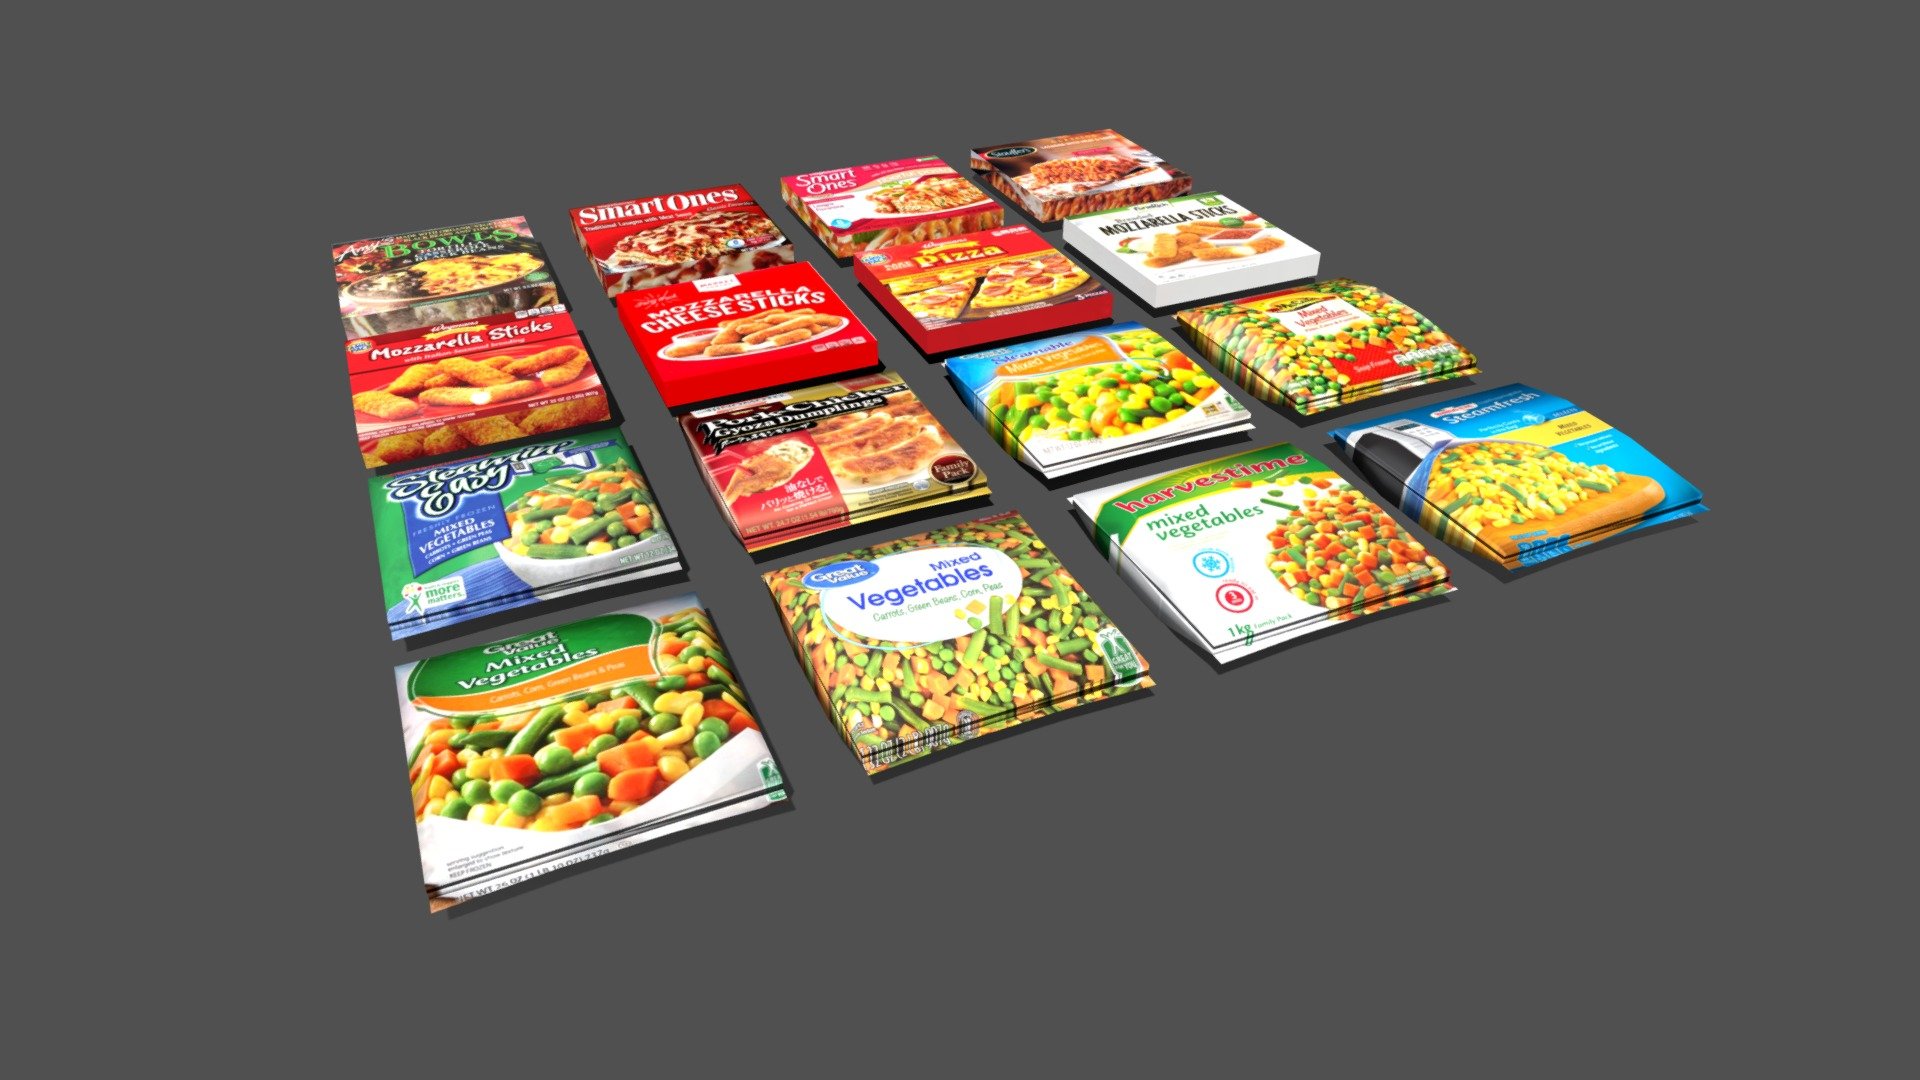 This is a collection of frozen food or refrigirated food items for shops. File formats are:

Blender
FBX
Max 2015

Foods are: Amy's bowls, Smart Ones, Stouffer's, Mozerella Sticks, Steamin Easy Vegtables, Pork &amp; Chicken Gyoza Dumplings, McCan Mixed vegetables, Steamfresh and great value vegetables - Frozen Foods- Sketchfab - Buy Royalty Free 3D model by 3D Content Online (@hknoblauch) 3d model